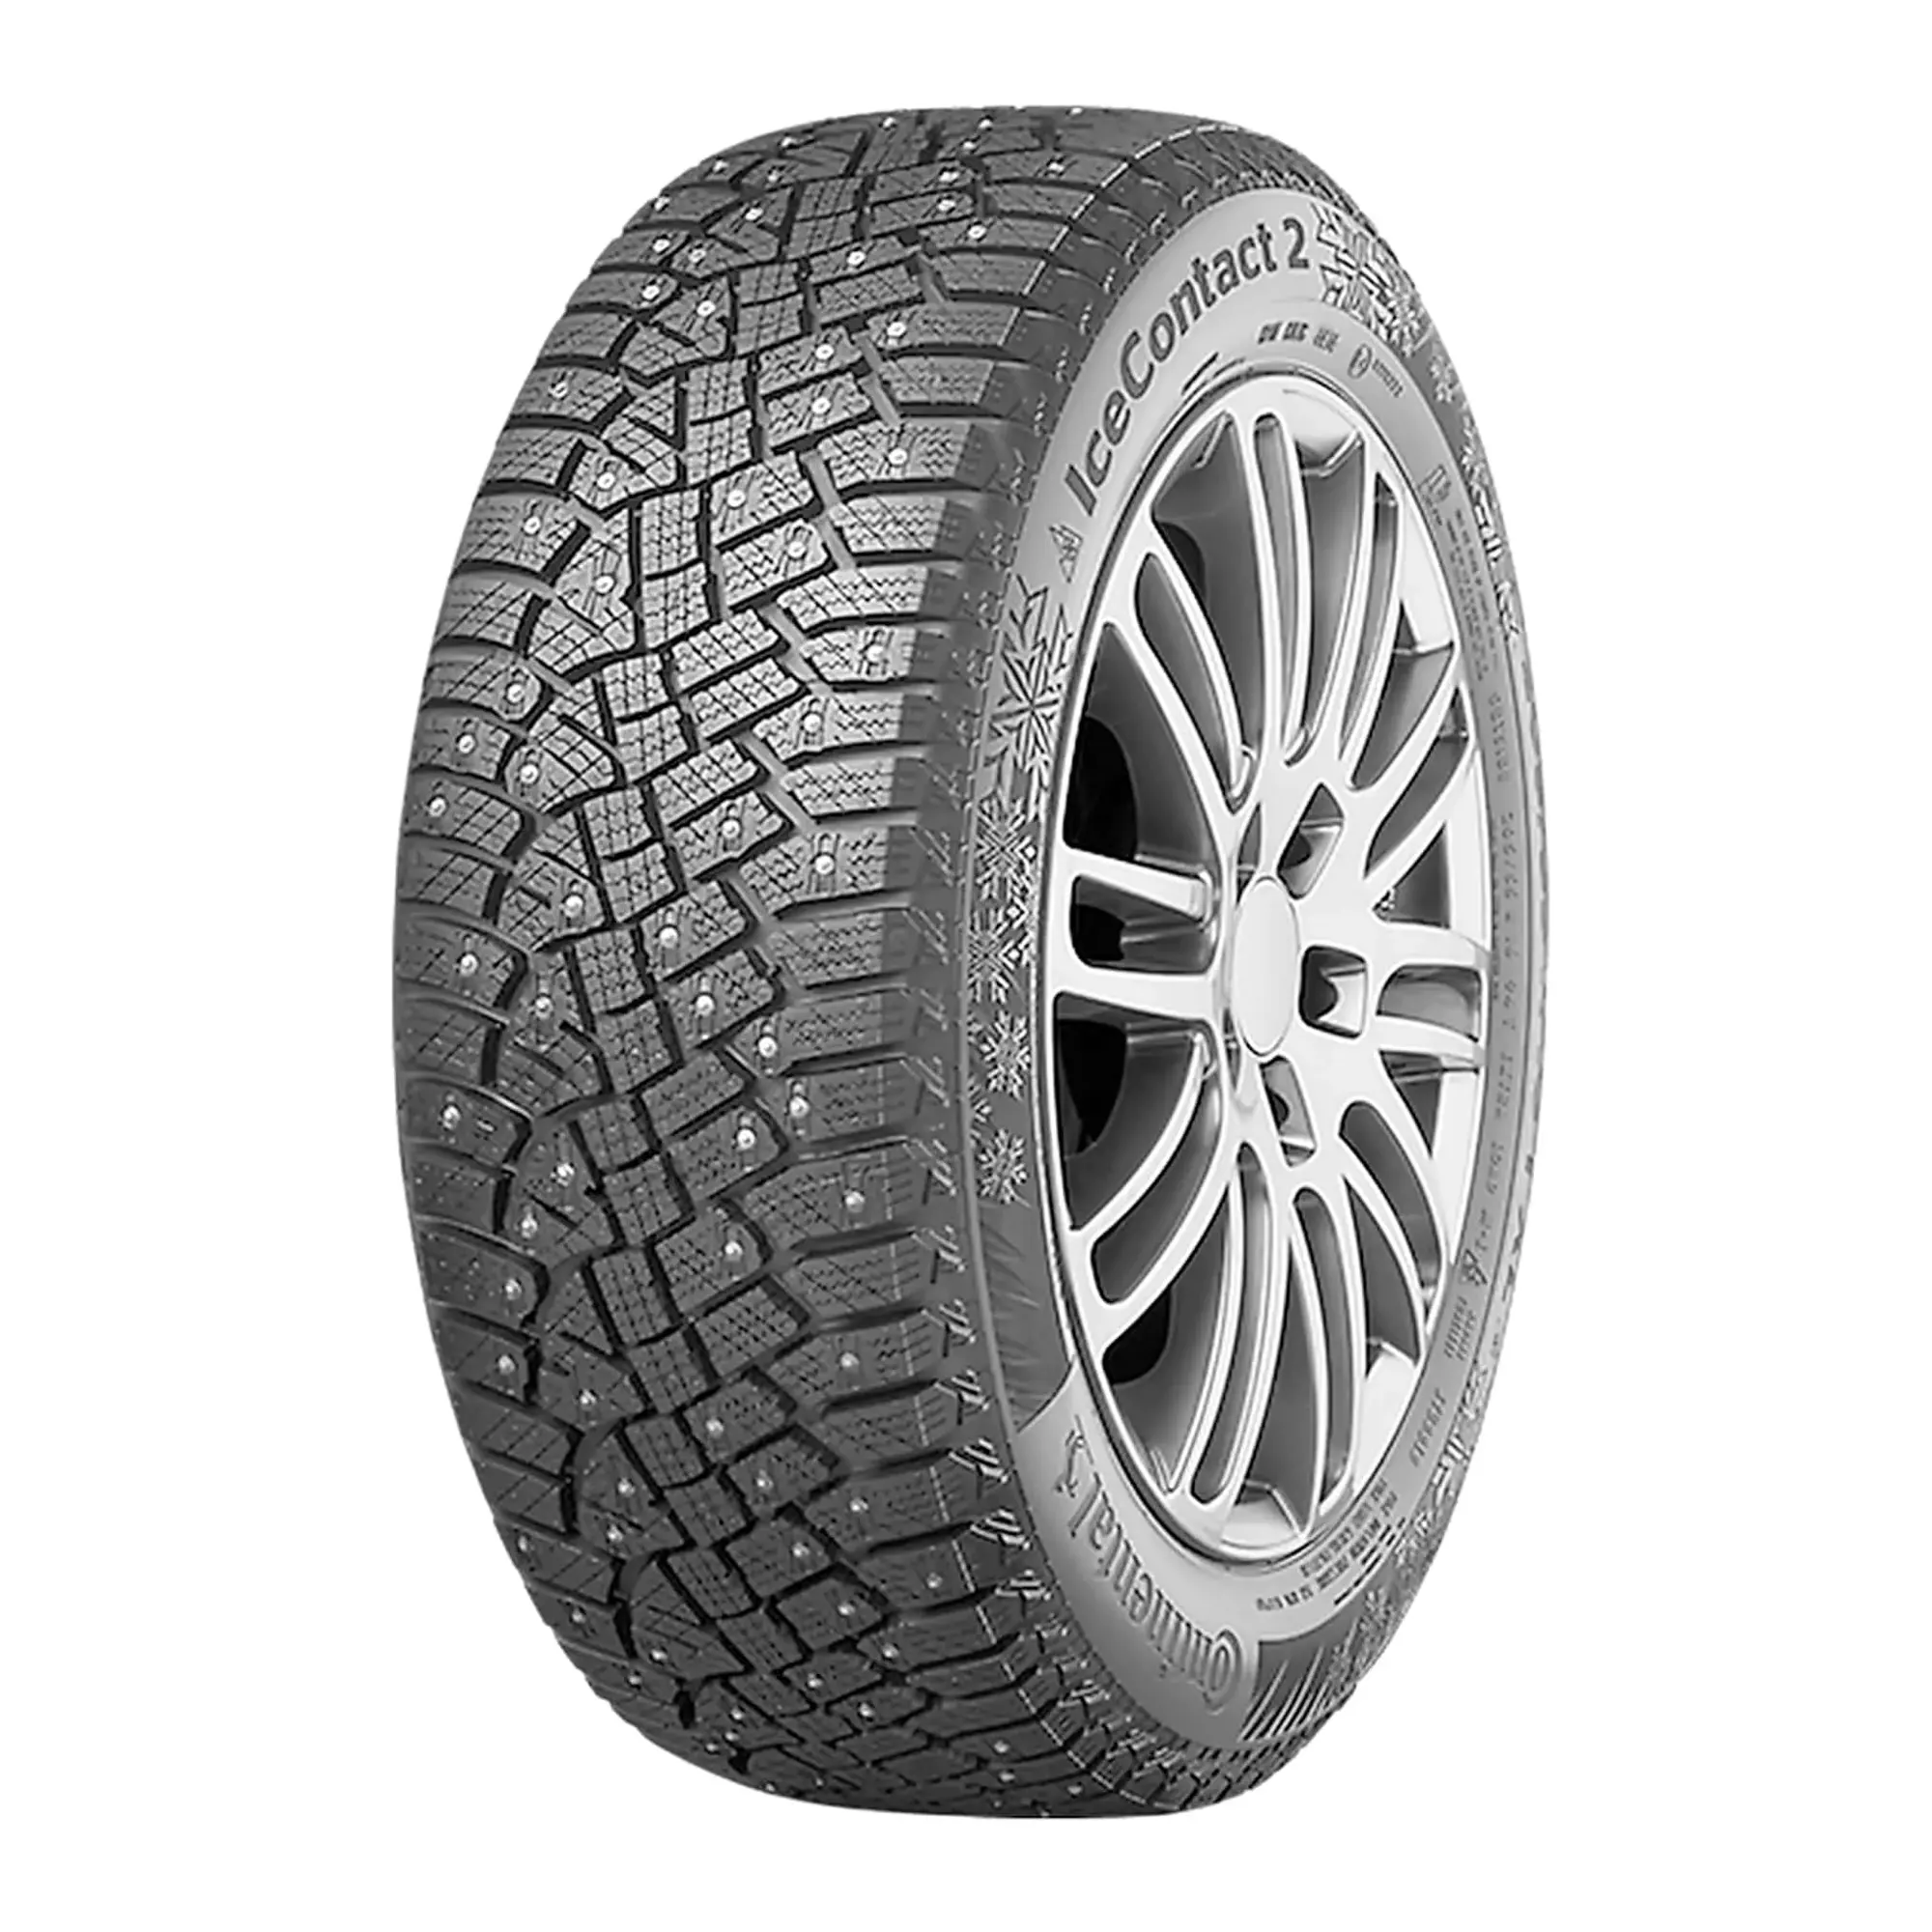 Шина 245/45R17 99T CONTIICECONTACT 2 KD